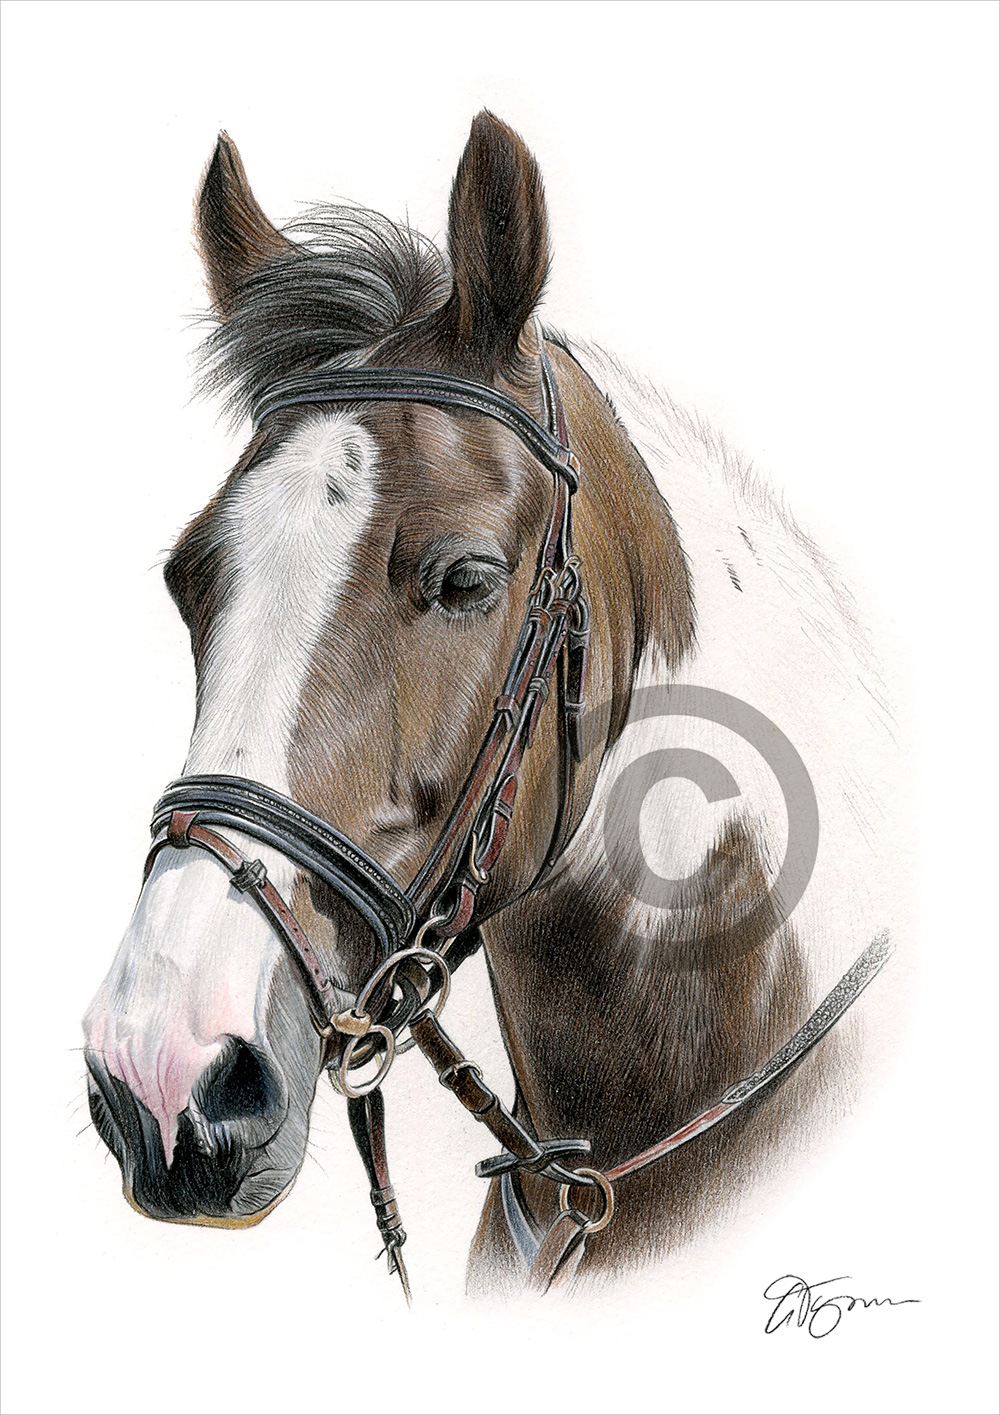 Pencil drawing commission of a brown horse by artist Gary Tymon